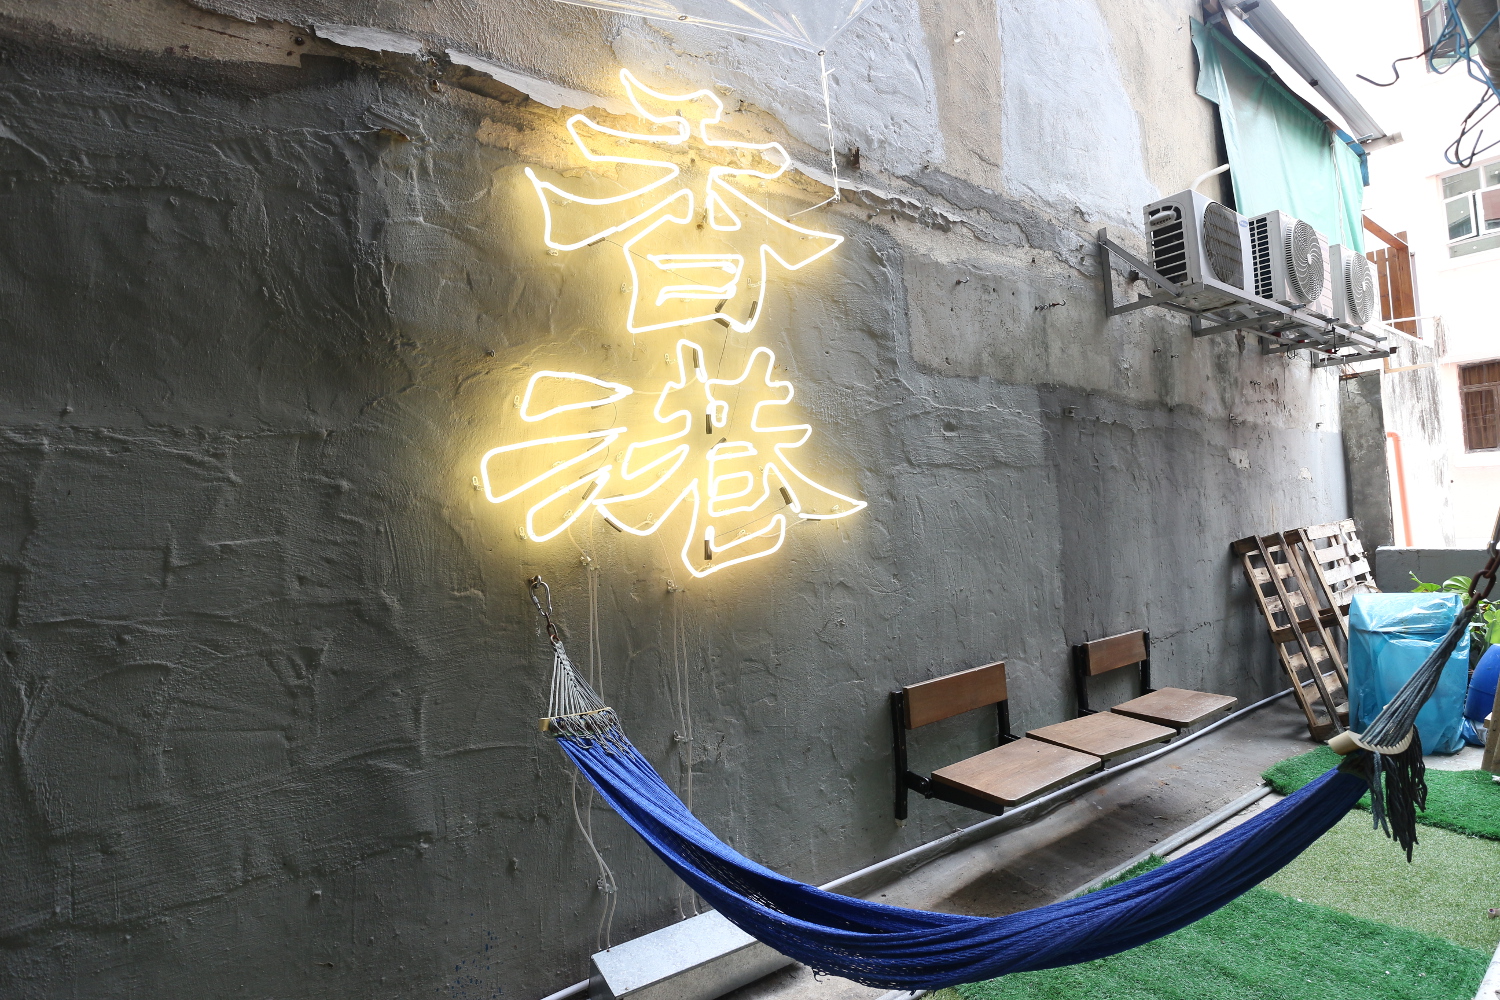 Escape the bustle: Wontonmeen's chill-out area. Image by Piera Chen / londoninfopage